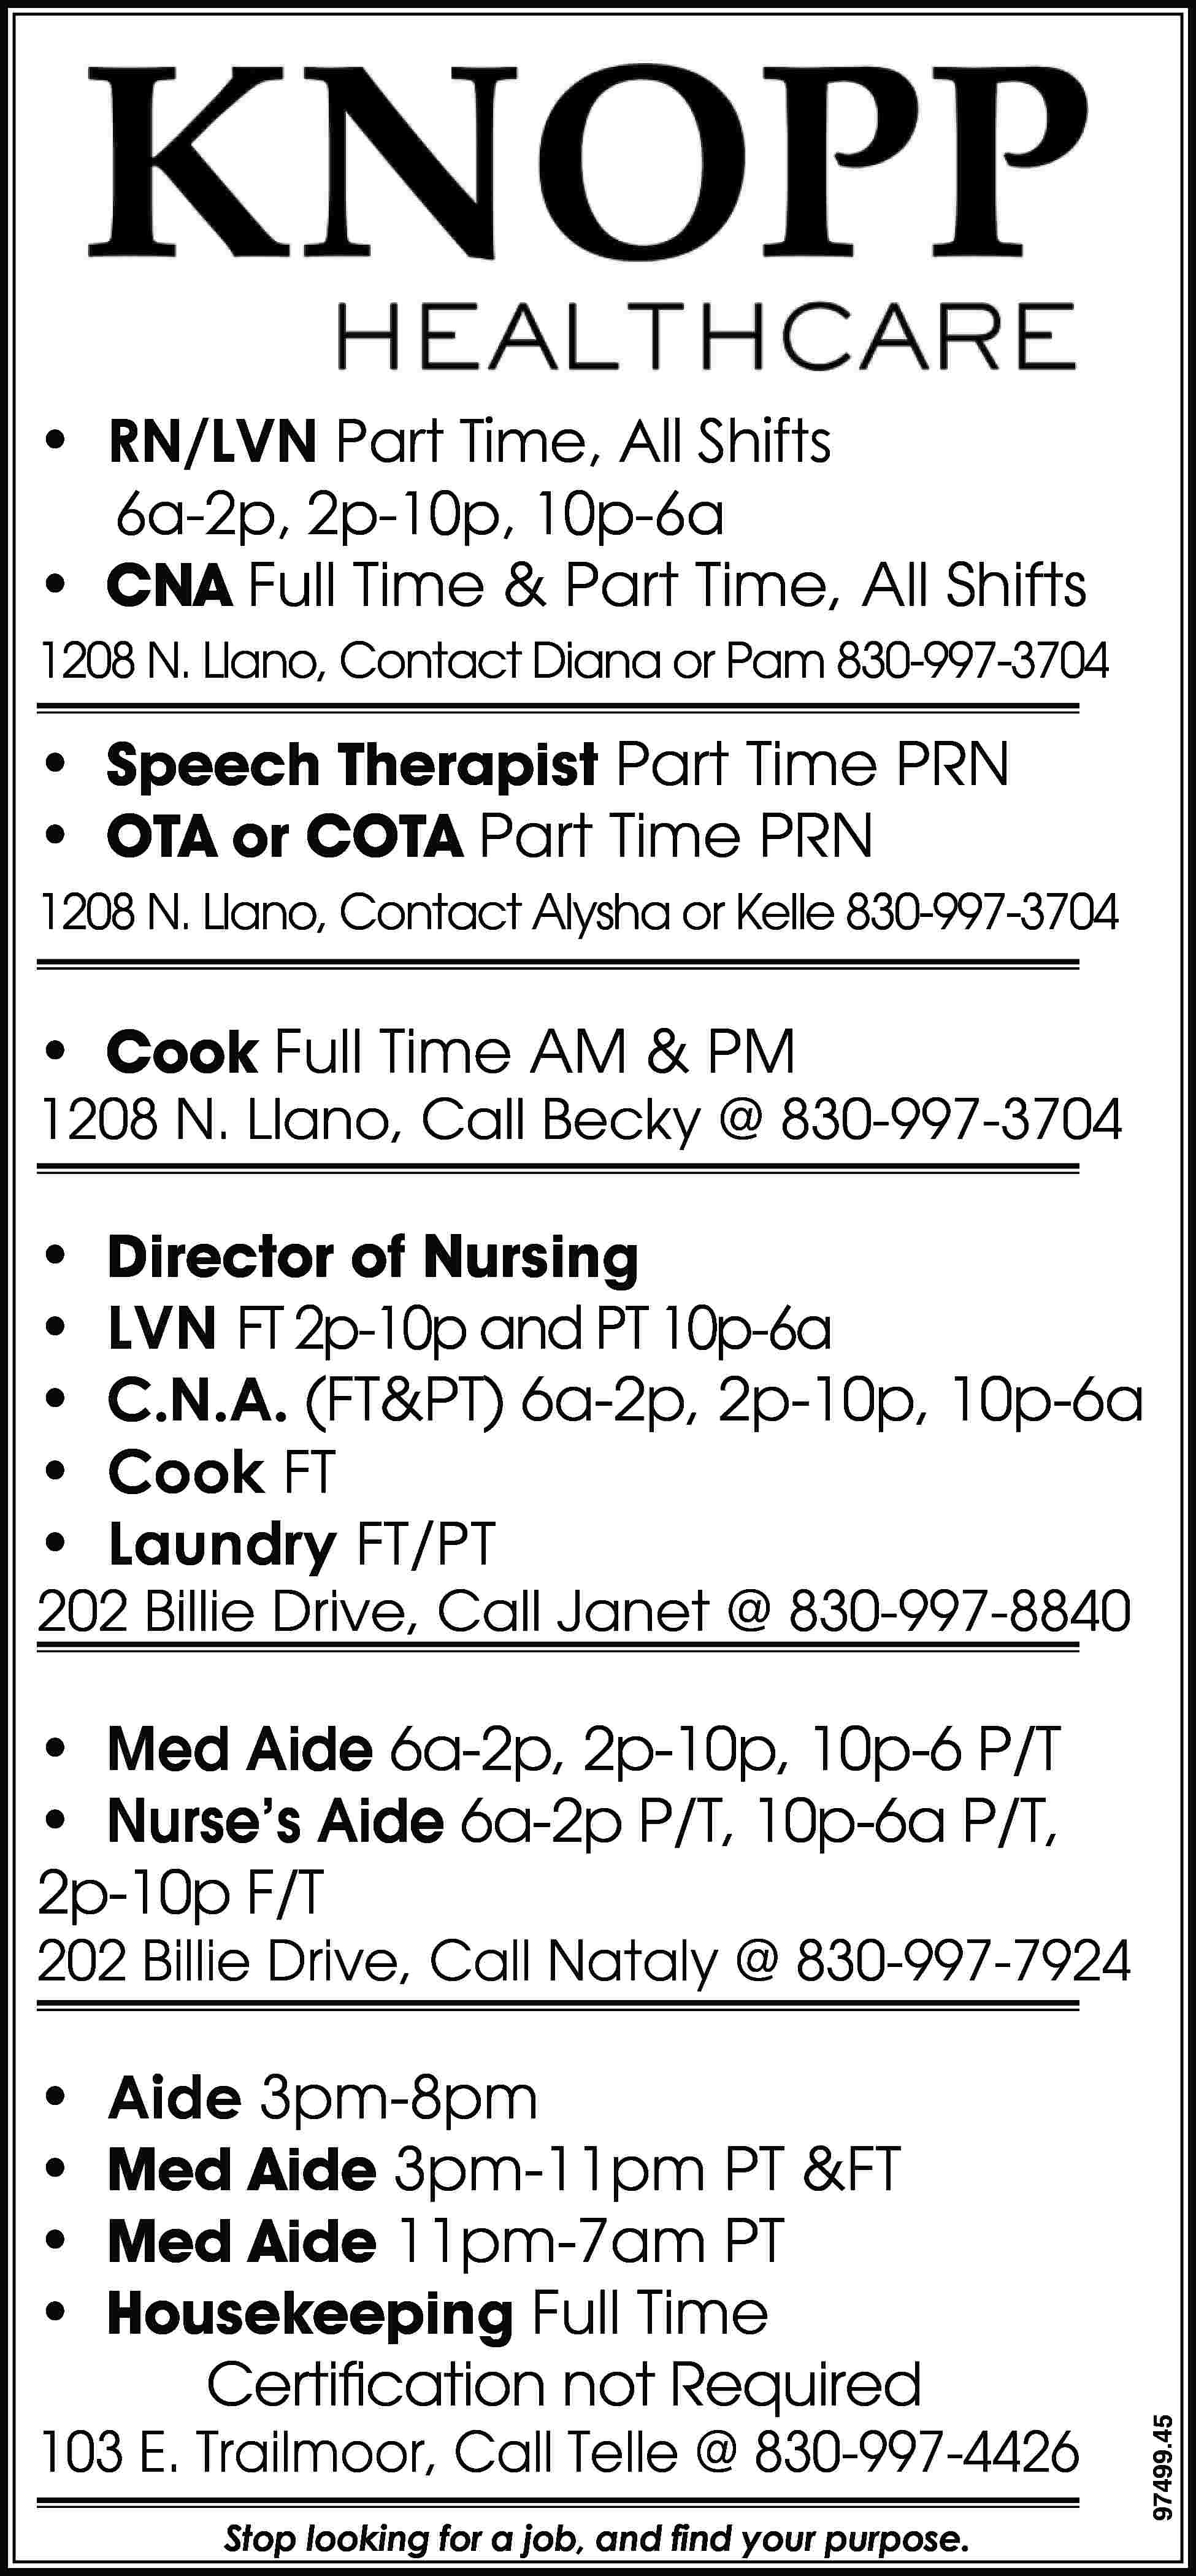 • RN/LVN Part Time, All  • RN/LVN Part Time, All Shifts 6a-2p, 2p-10p, 10p-6a • CNA Full Time & Part Time, All Shifts 1208 N. Llano, Contact Diana or Pam 830-997-3704 • Speech Therapist Part Time PRN • OTA or COTA Part Time PRN 1208 N. Llano, Contact Alysha or Kelle 830-997-3704 • Cook Full Time AM & PM 1208 N. Llano, Call Becky @ 830-997-3704 • • • • • Director of Nursing LVN FT 2p-10p and PT 10p-6a C.N.A. (FT&PT) 6a-2p, 2p-10p, 10p-6a Cook FT Laundry FT/PT 202 Billie Drive, Call Janet @ 830-997-8840 • Med Aide 6a-2p, 2p-10p, 10p-6 P/T • Nurse’s Aide 6a-2p P/T, 10p-6a P/T, 2p-10p F/T • • • • Aide 3pm-8pm Med Aide 3pm-11pm PT &FT Med Aide 11pm-7am PT Housekeeping Full Time Certification not Required 103 E. Trailmoor, Call Telle @ 830-997-4426 Stop looking for a job, and find your purpose. 97499.45 202 Billie Drive, Call Nataly @ 830-997-7924